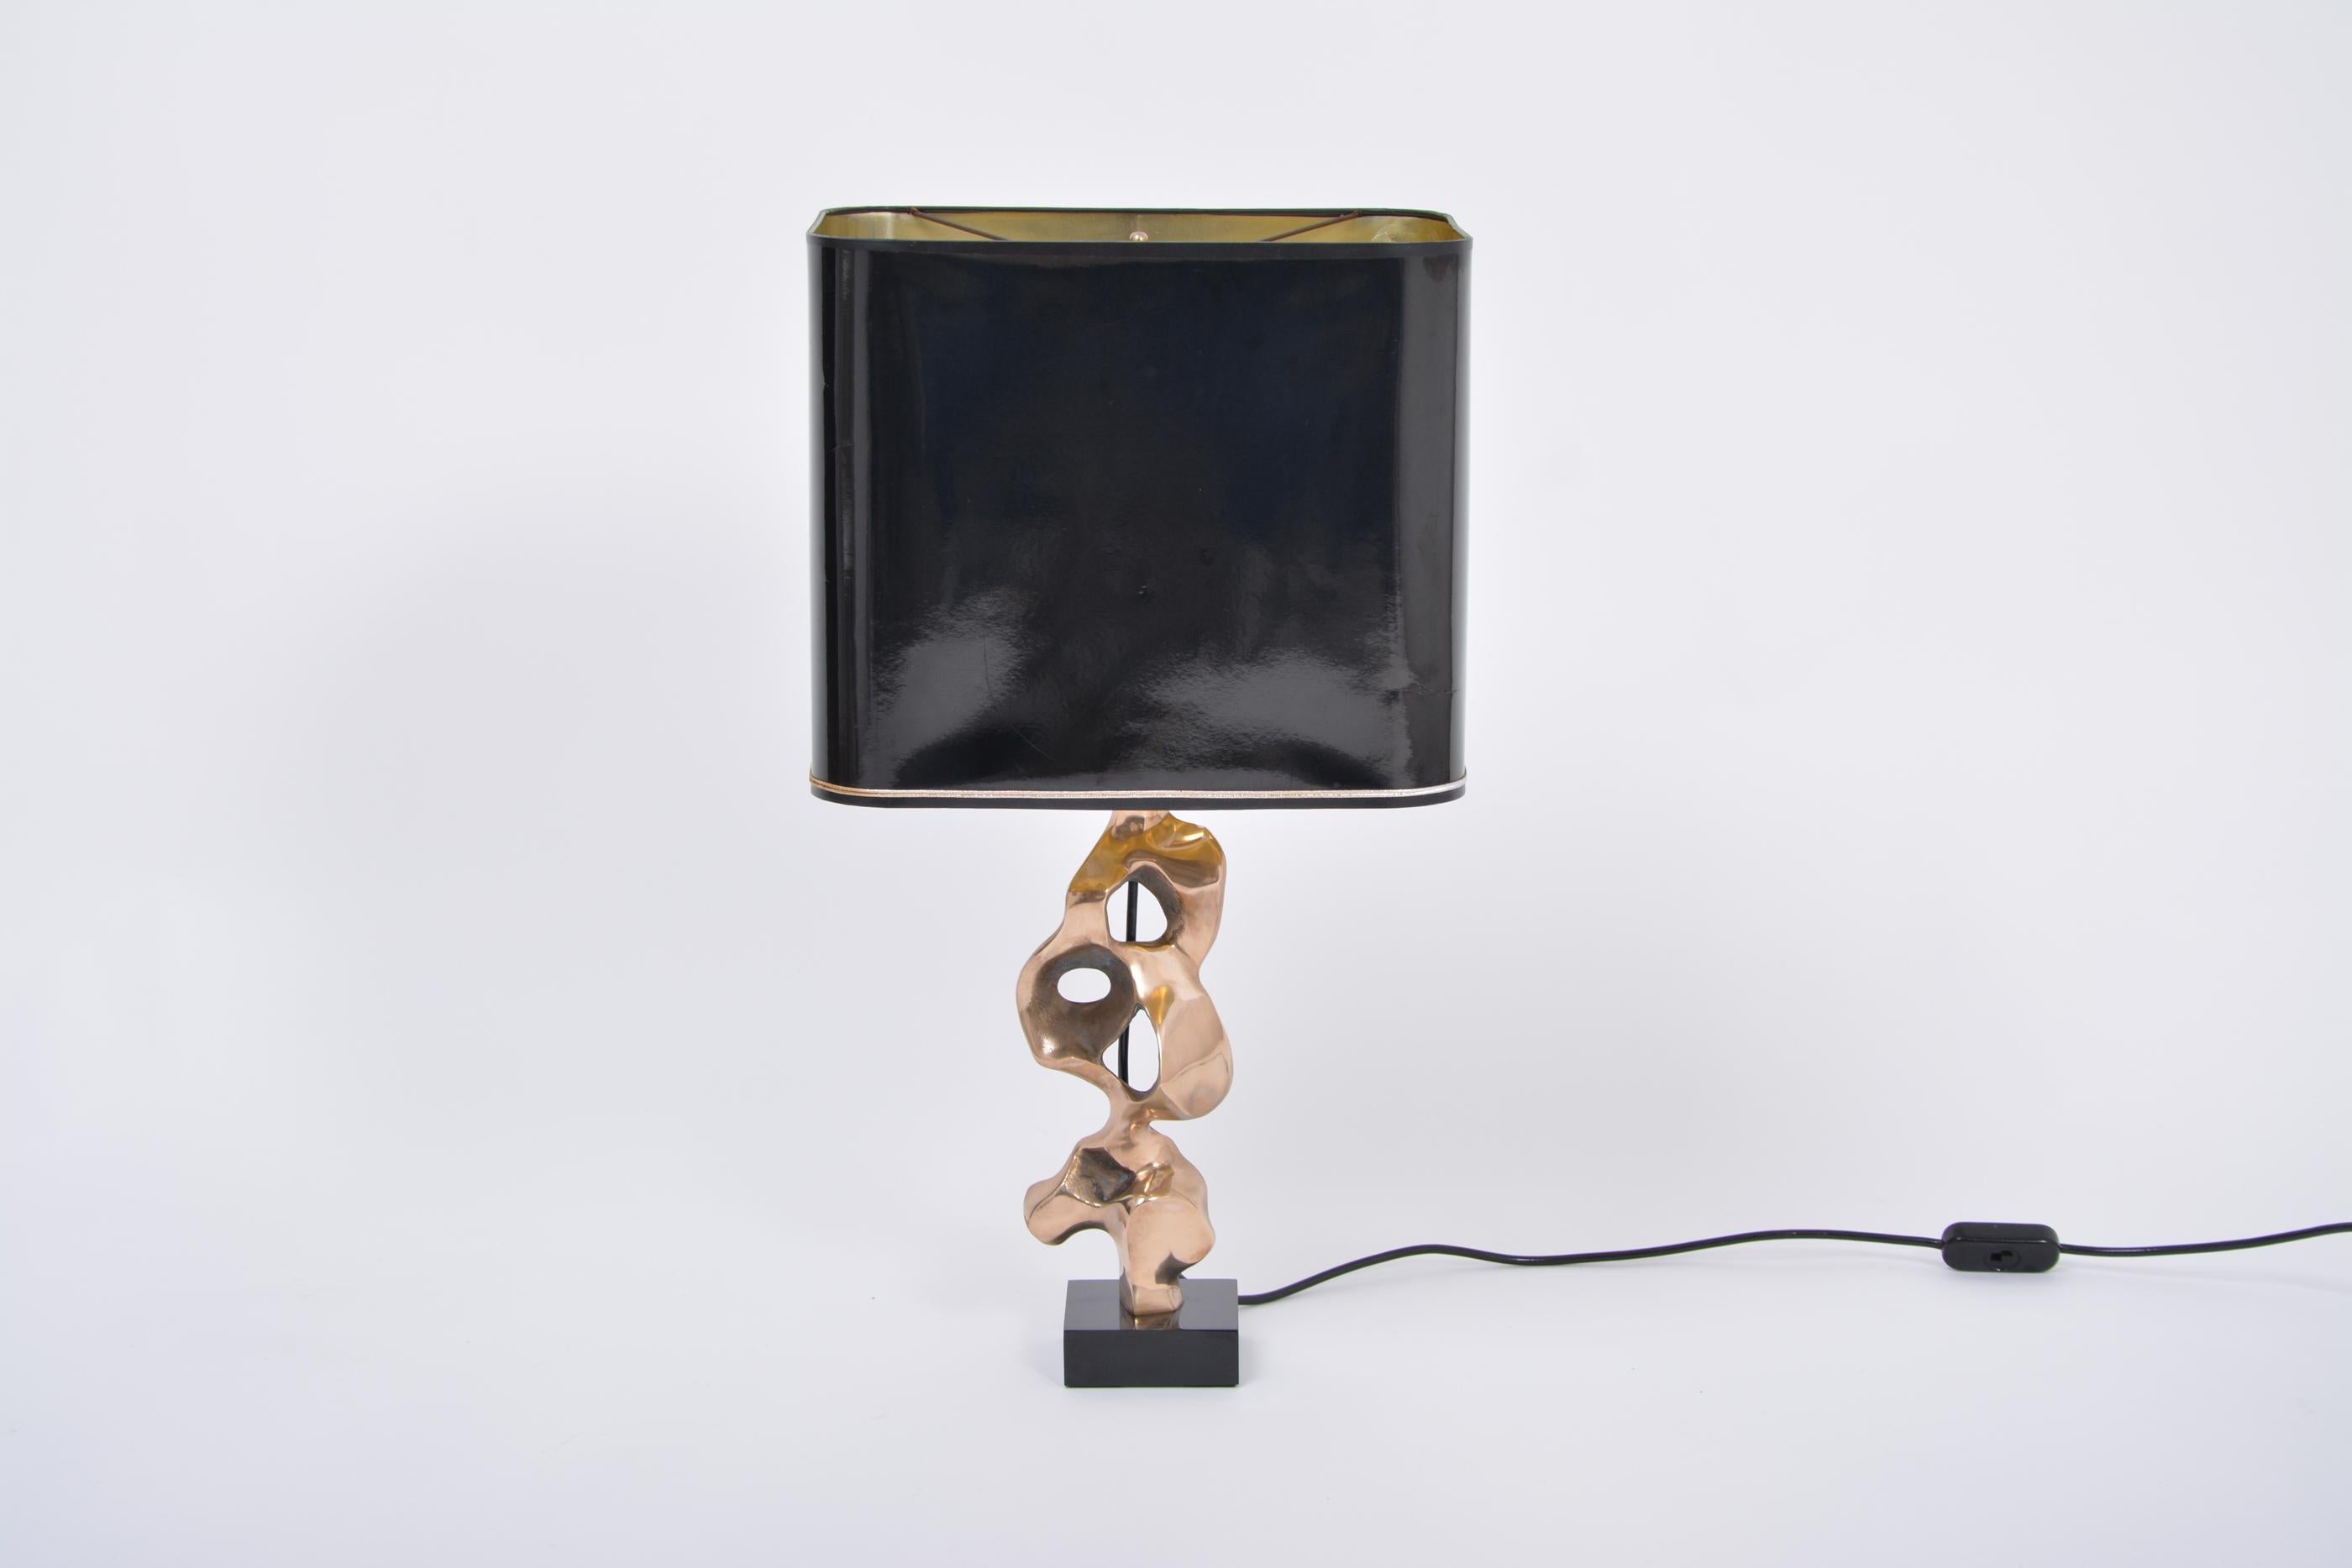 Amazing sculptural table lamp designed and manufactured by artists and sculptor Michel Jaubert in France in the 1970s. This hand sculpted lamp is more a piece of art that gives light as well. Solid bronze sculptural foot with black lacquered wooden